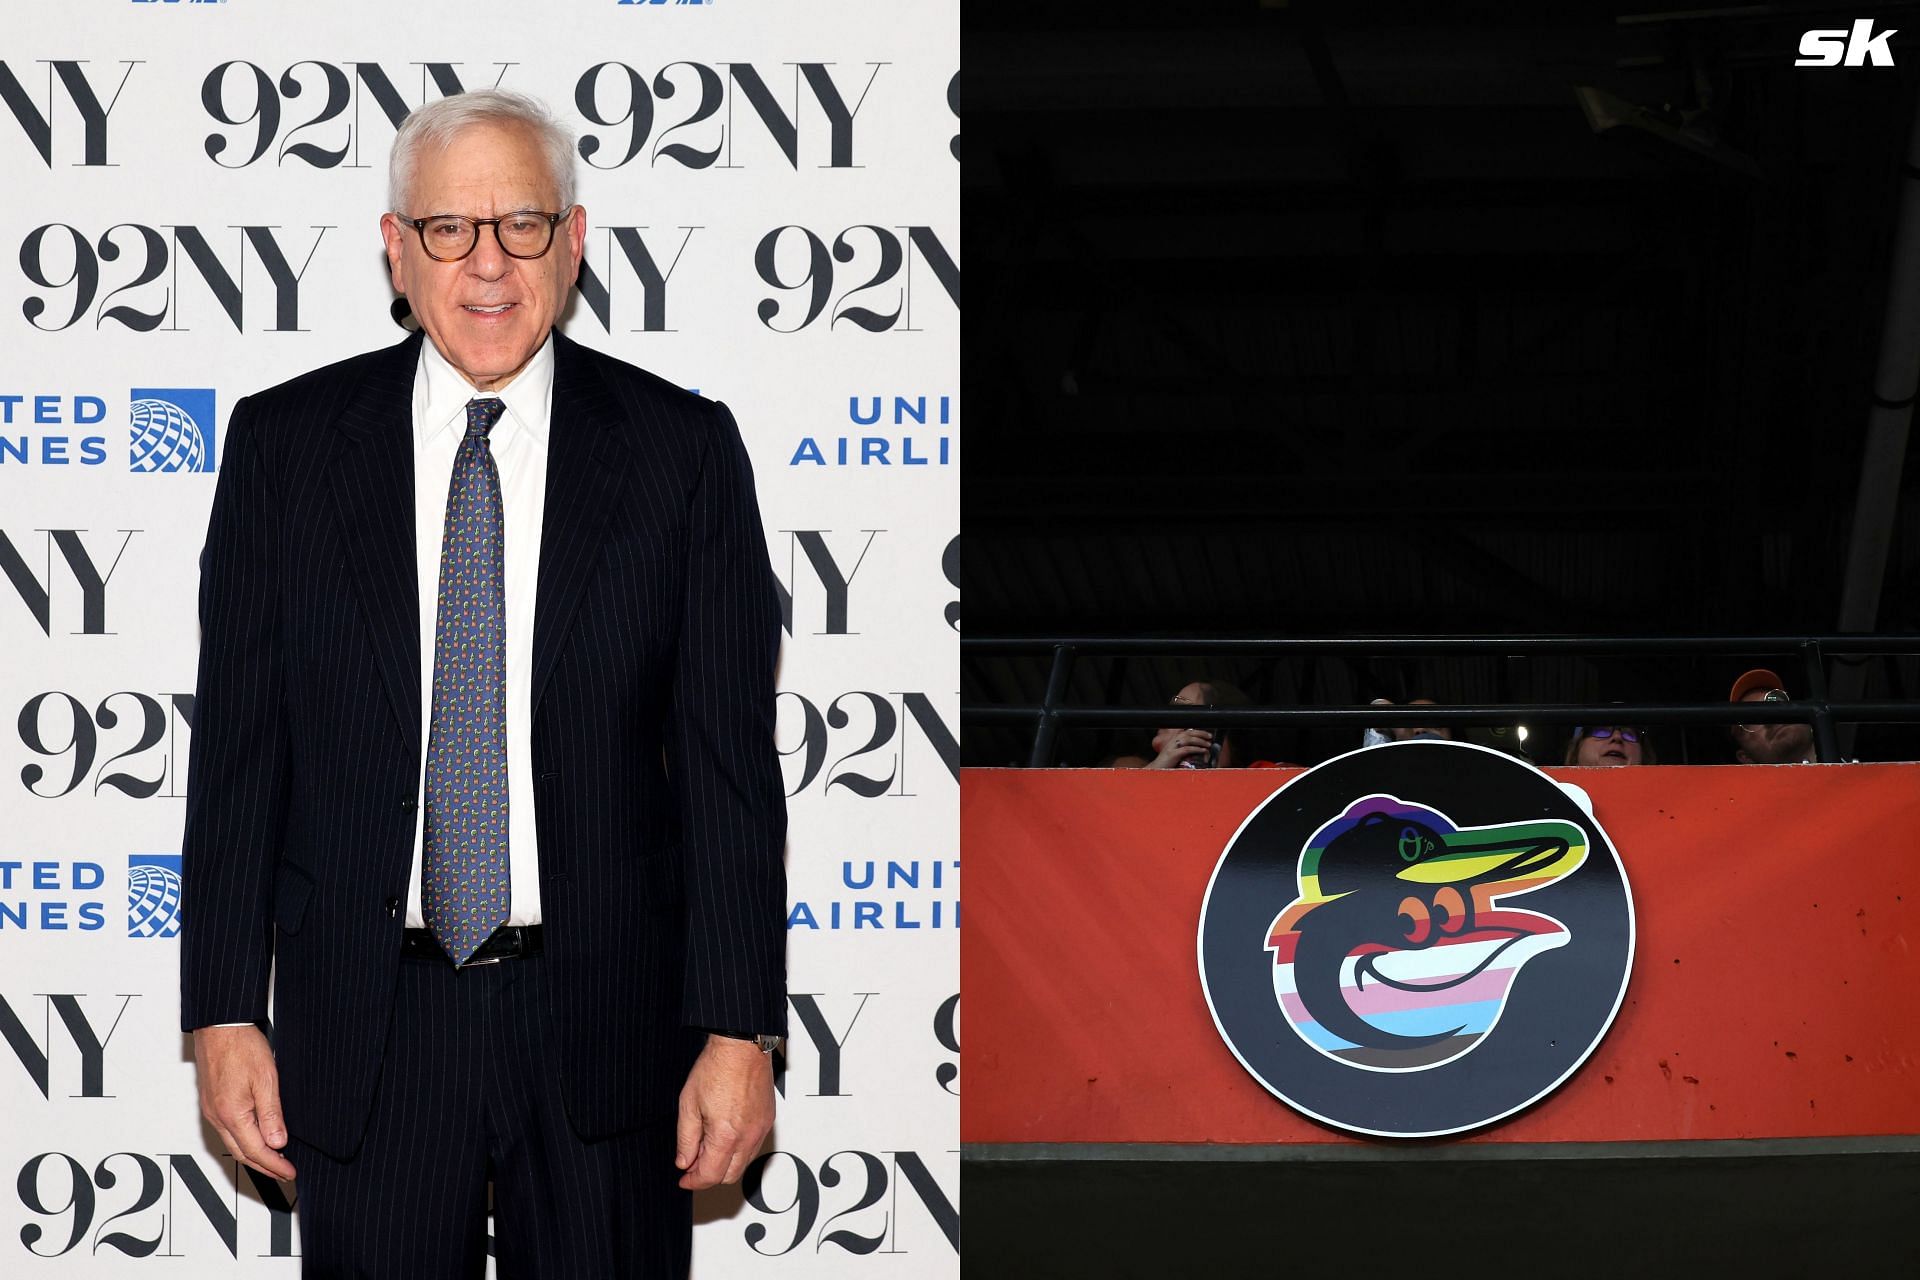 David Rubenstein officially becomes the new owner of the Baltimore Orioles